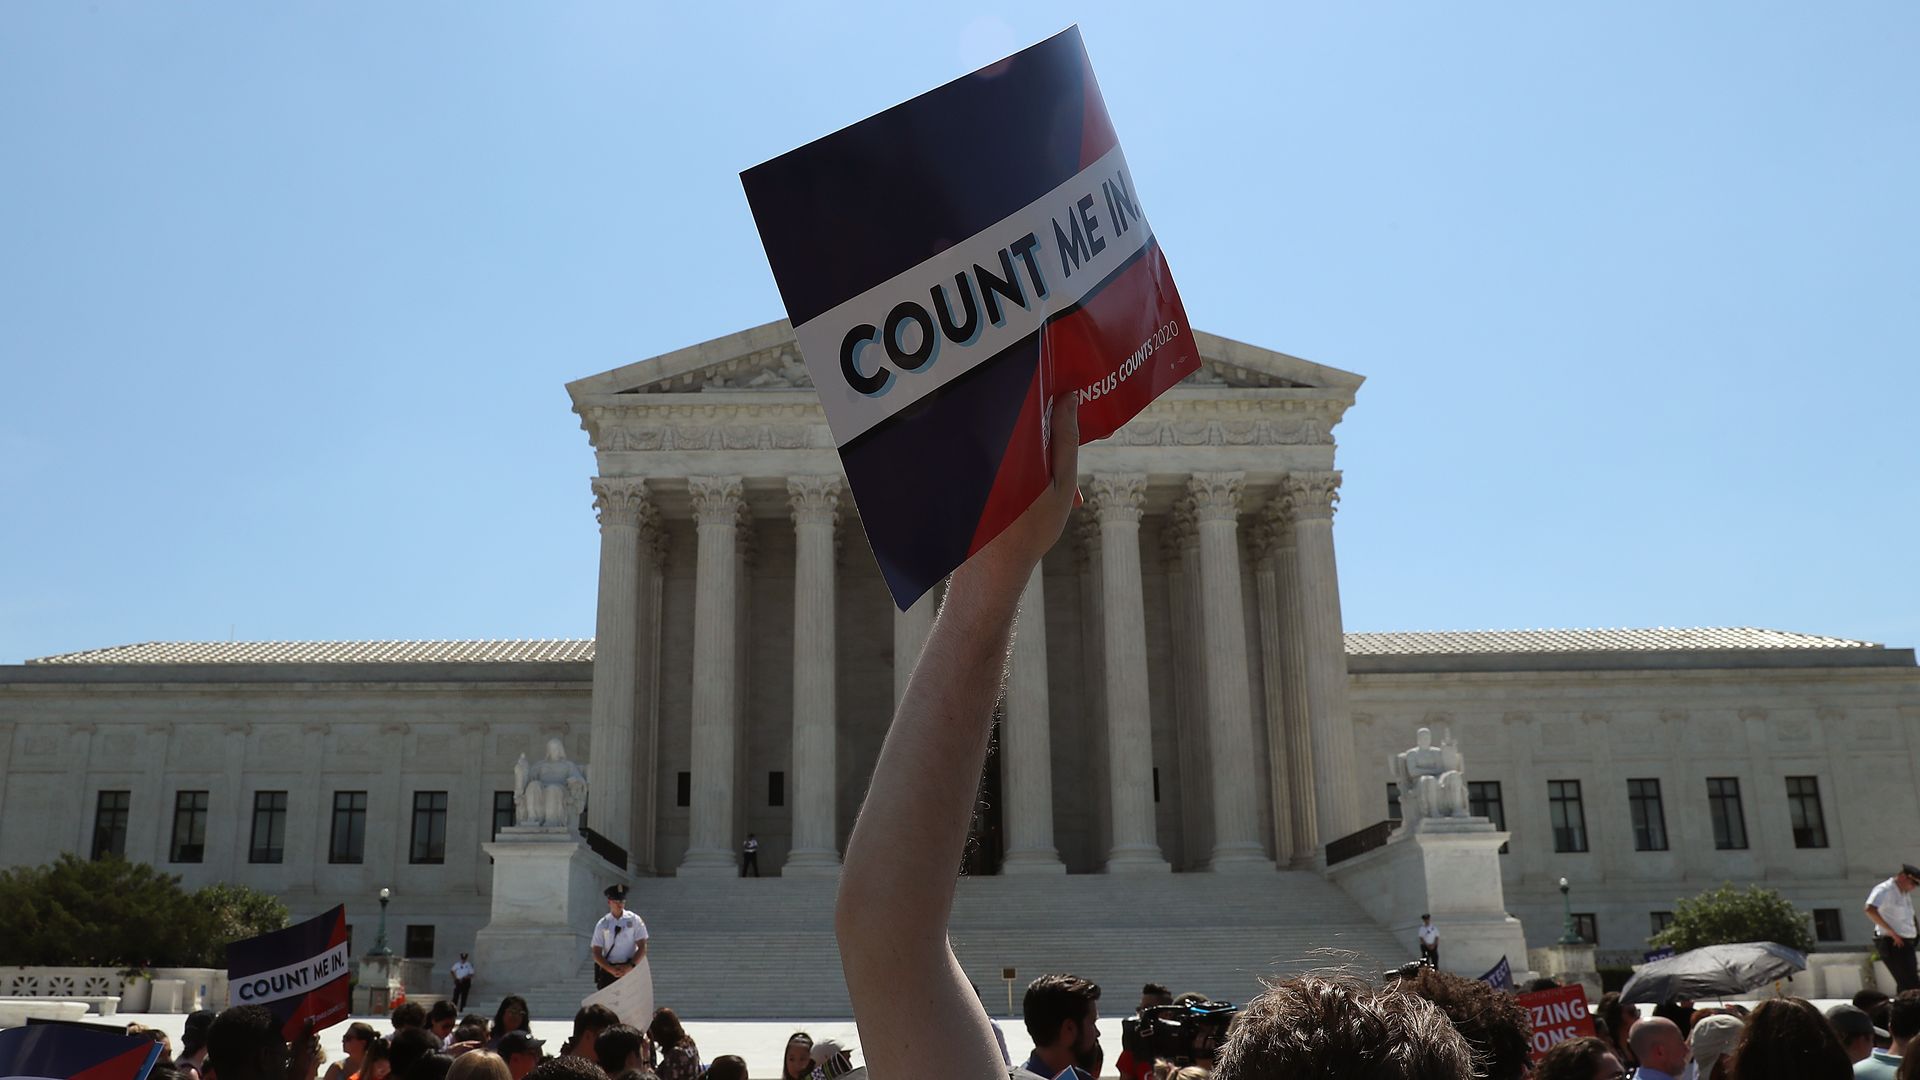 This image shows a man holding a "Count Me in" sign in front of the Supreme Court at a protest.